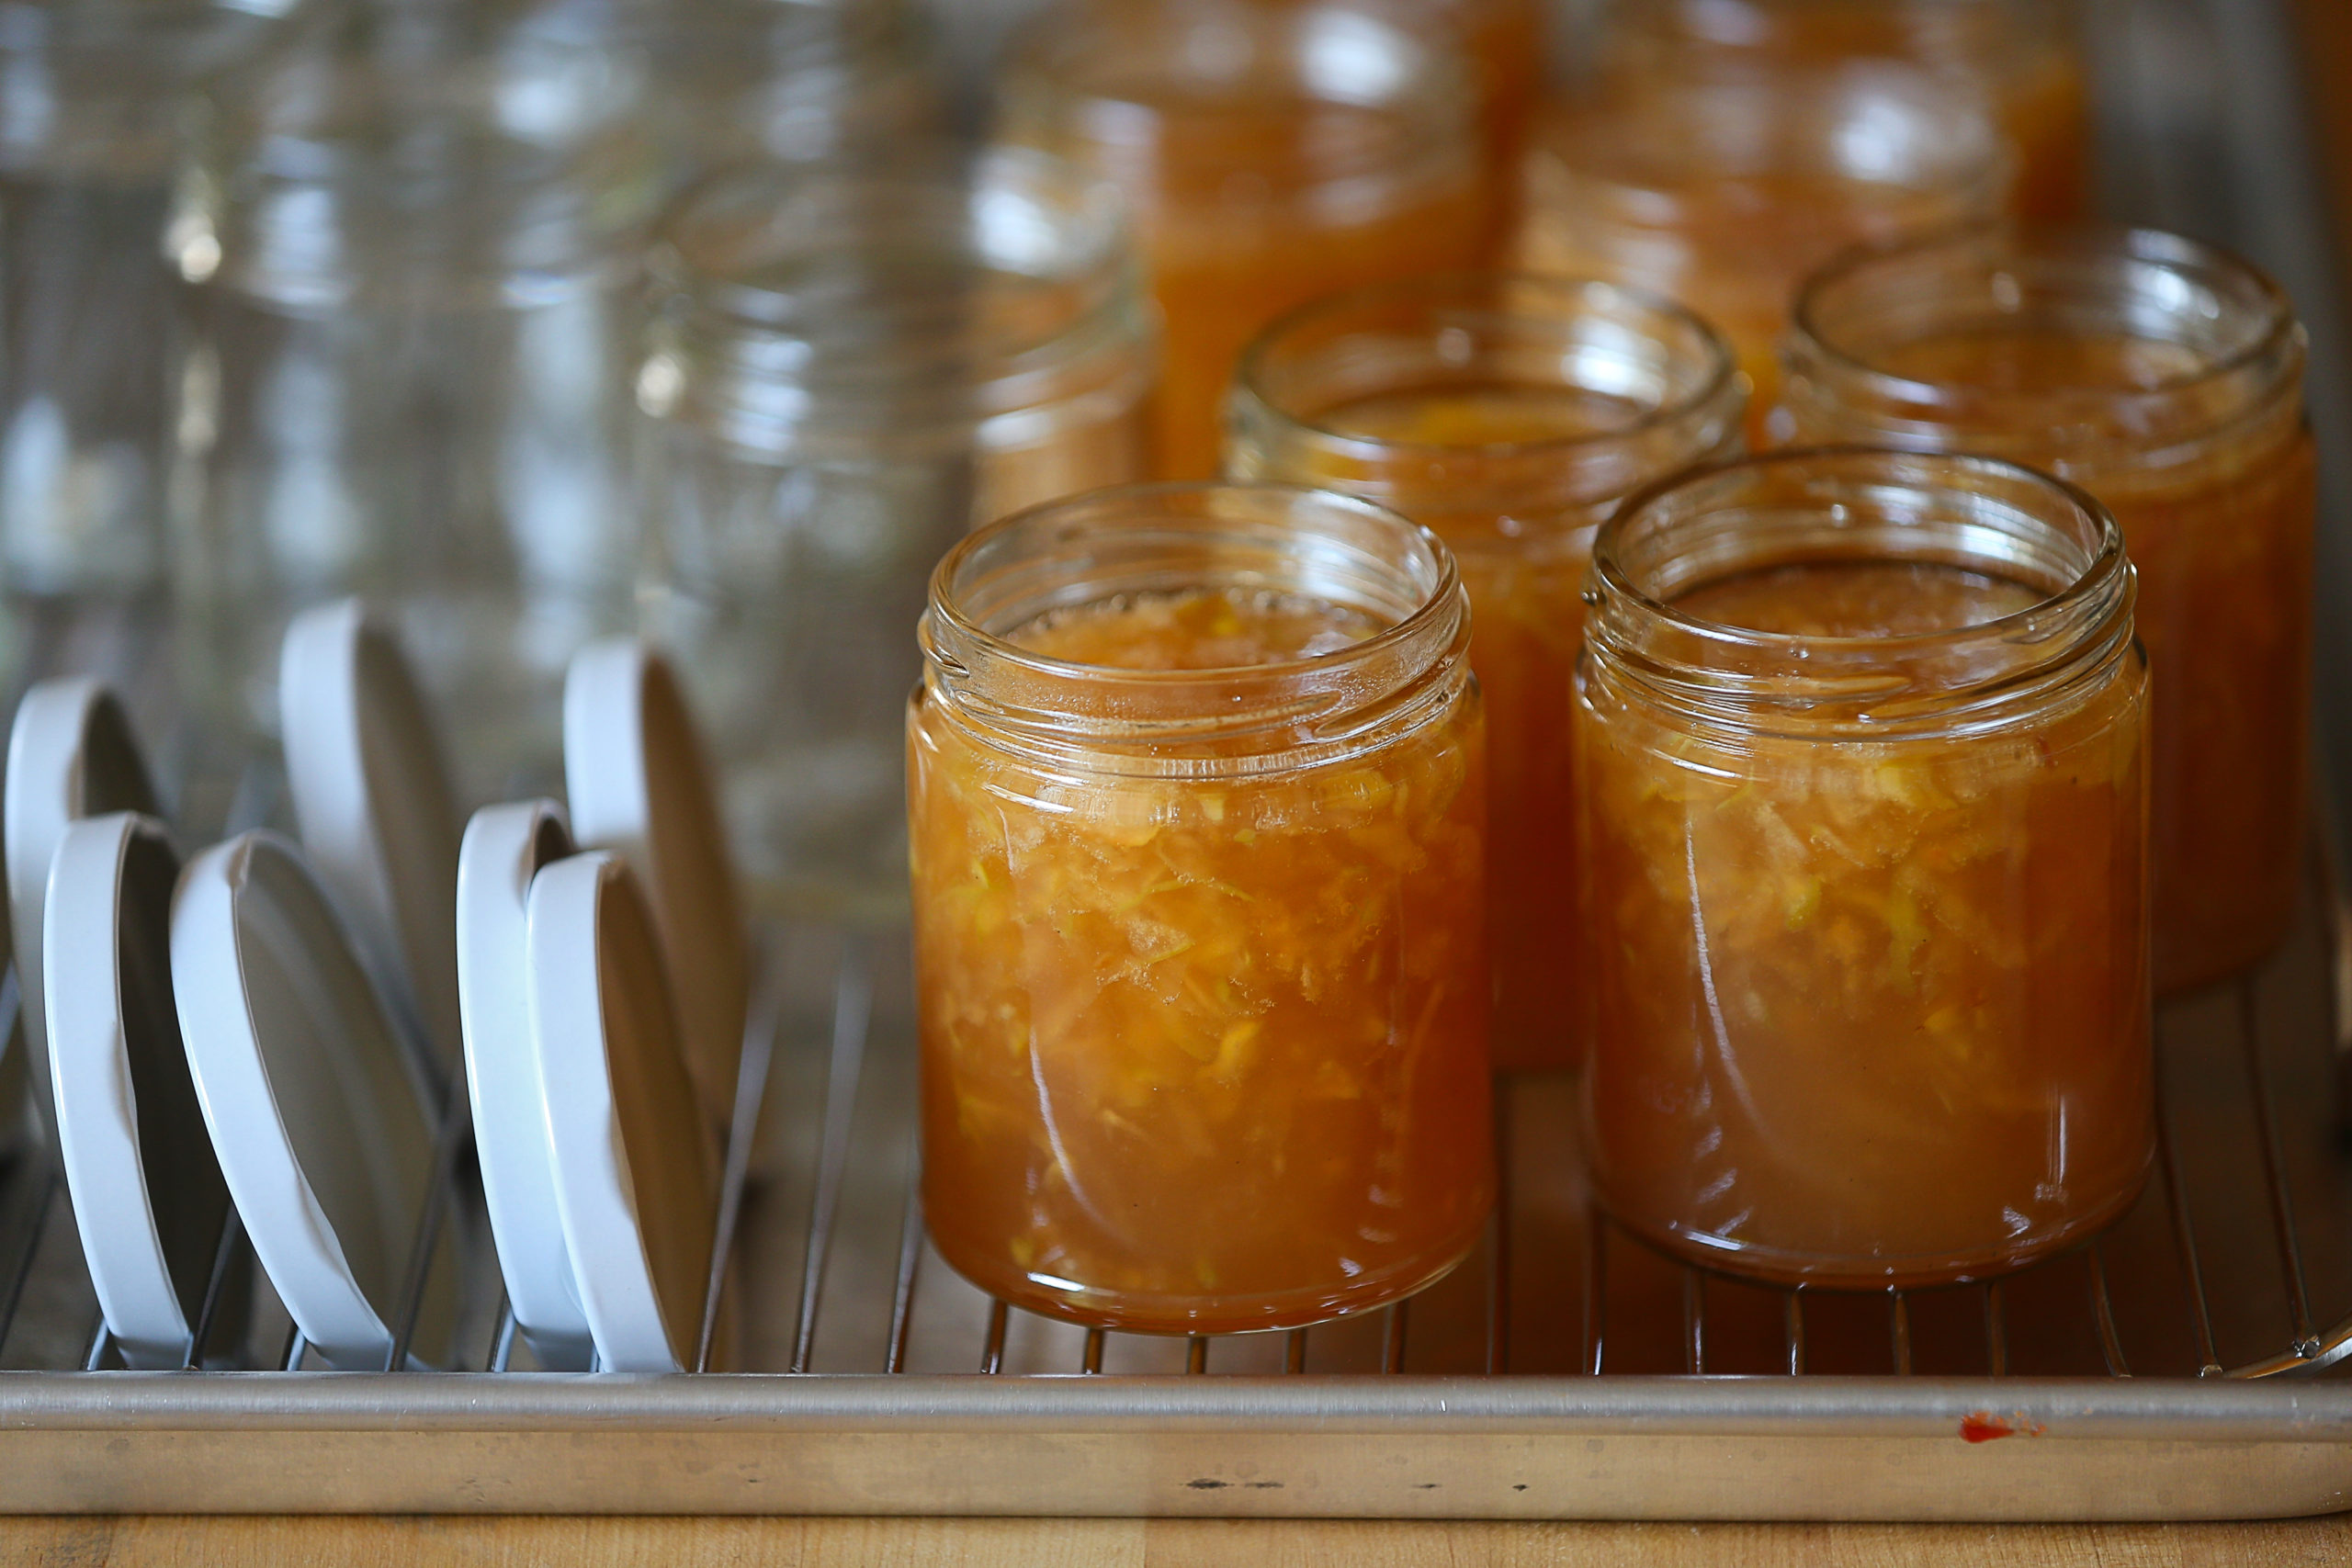 Freshly made Fourteen Magpies Handmade Jams & Preserves Gravenstein Apple Jelly waits to be sealed in jars in Santa Rosa on Wednesday, July 28, 2021. (Christopher Chung/ The Press Democrat)